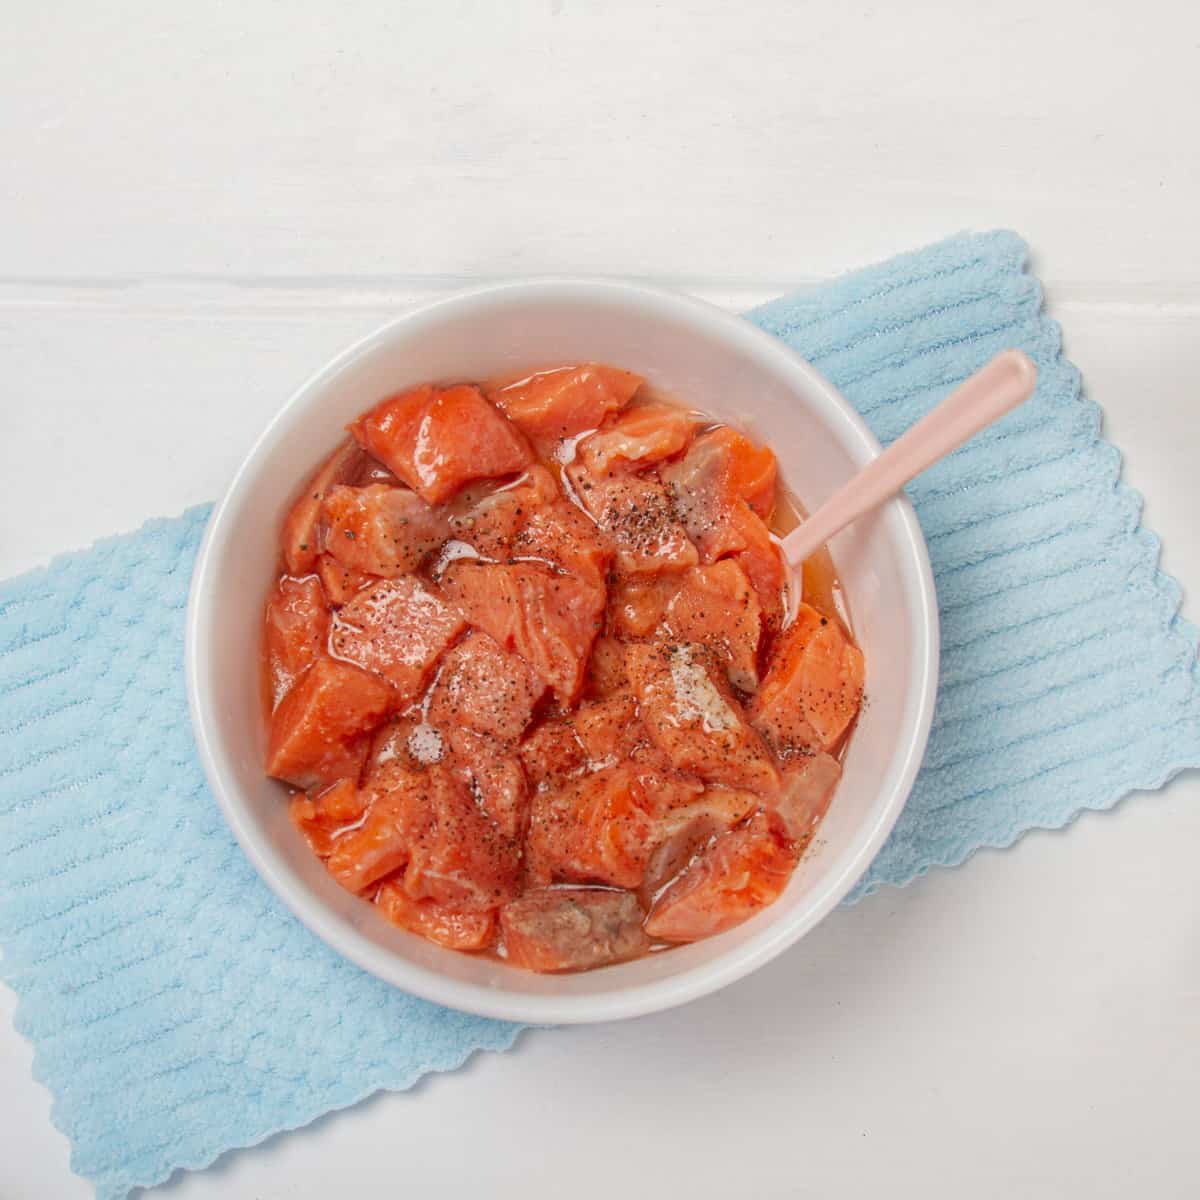 Chunks of fresh salmon coated with lime juice, salt and pepper in a bowl.